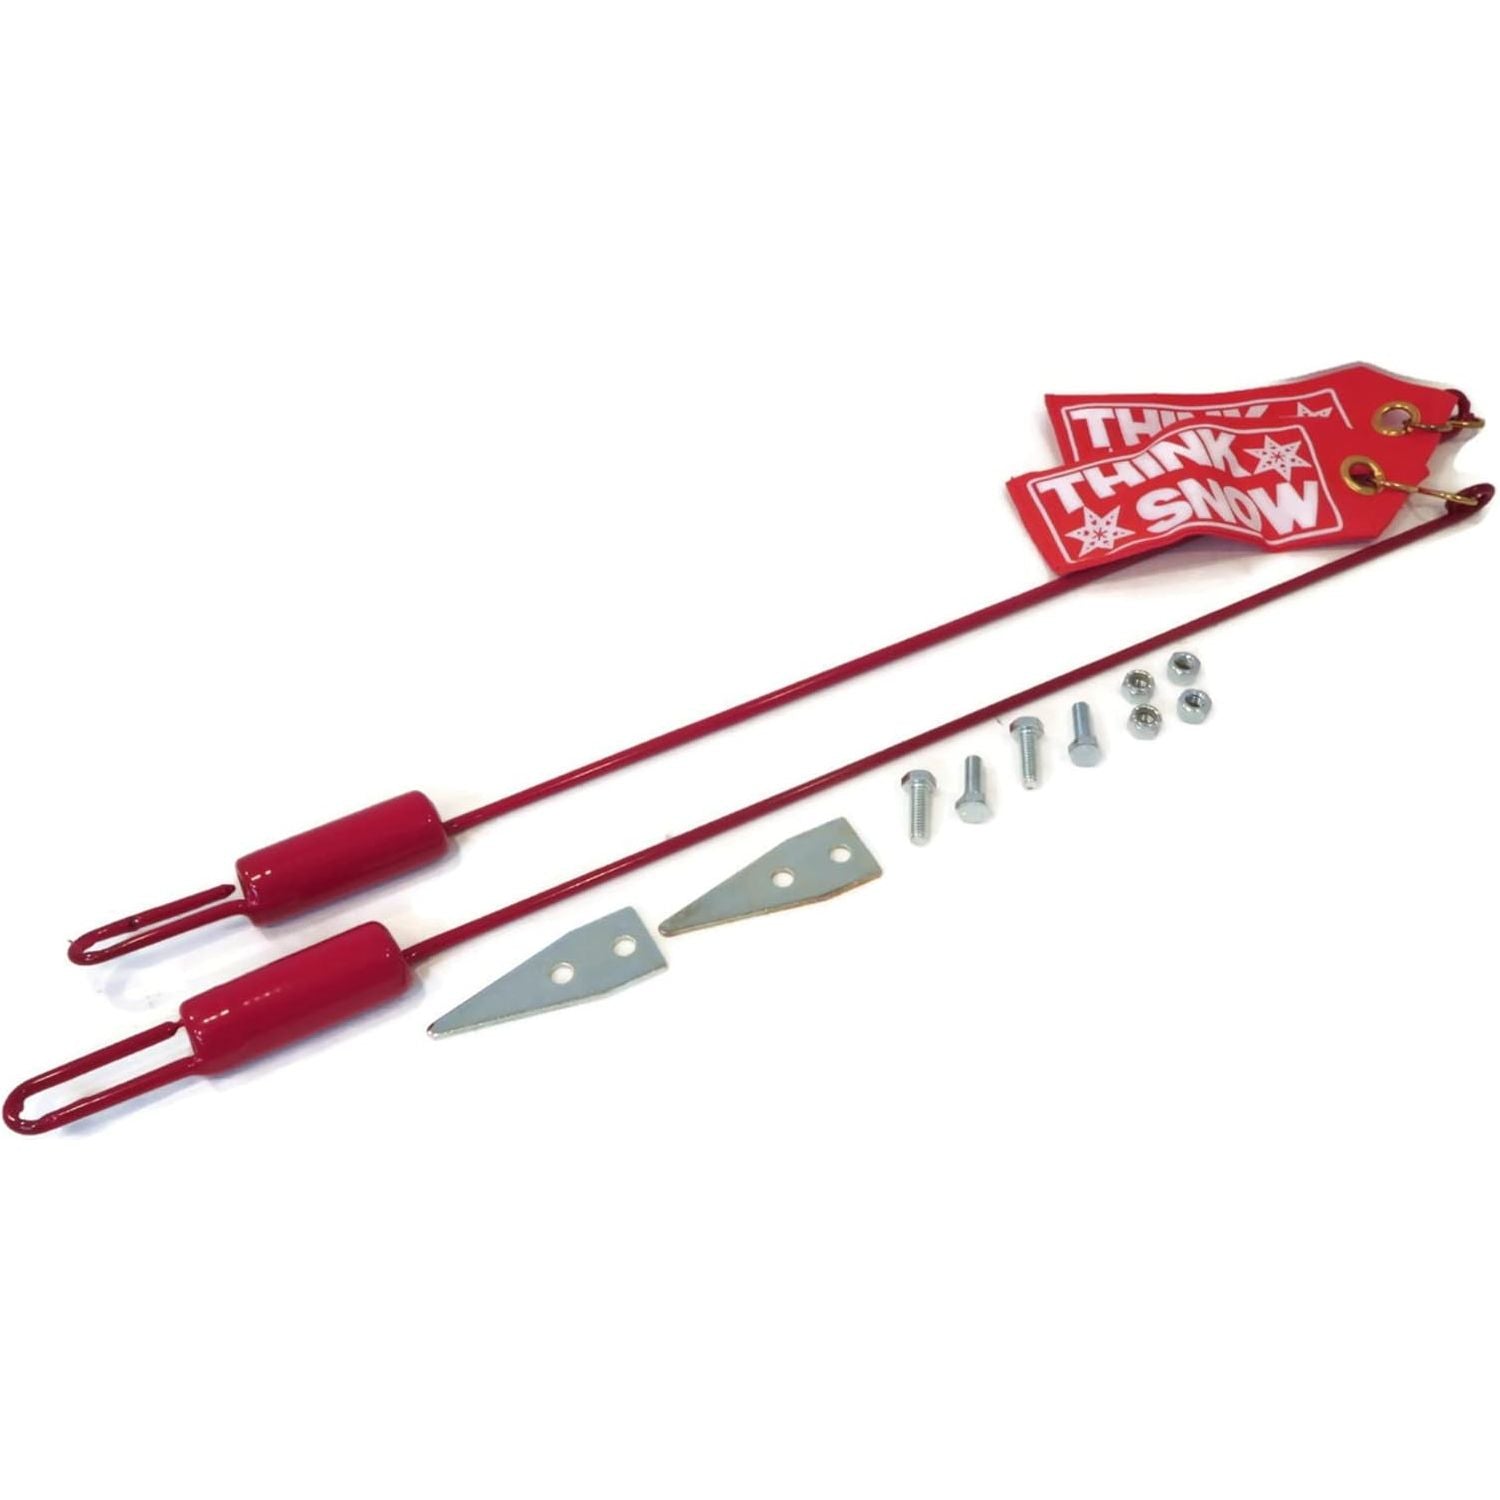 SBU 1308210 Buyers Snow Plow Guide Flags Kit (Bolt On, Red, 26")